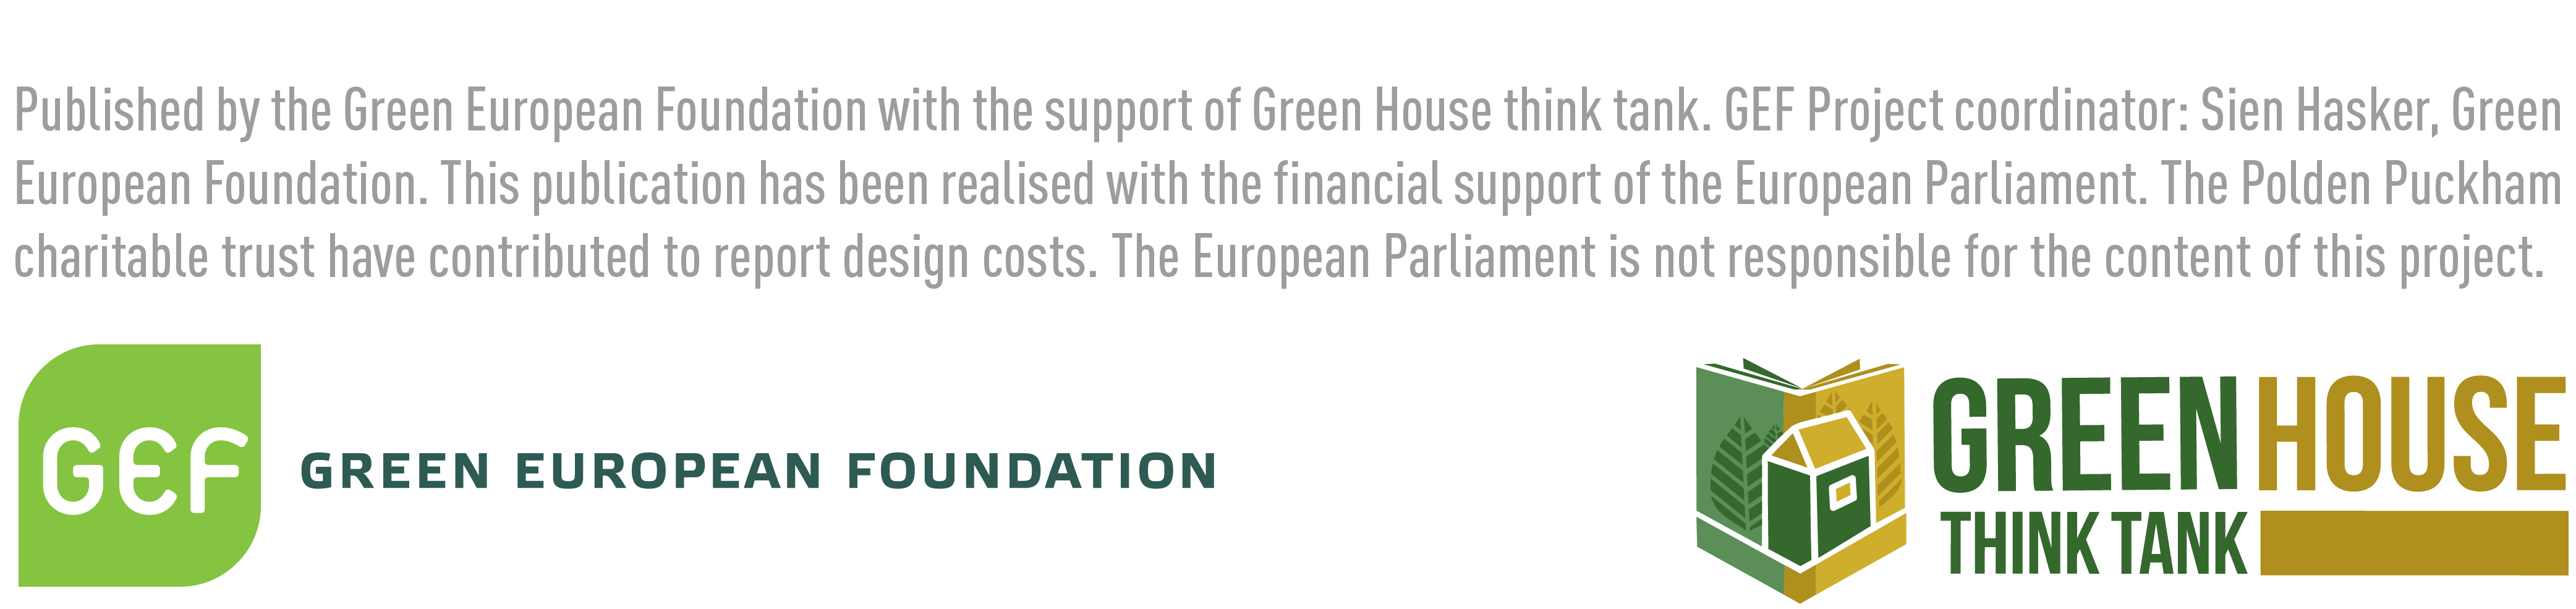 The logos of the Green European Foundation and Green House Think Tank with text which reads Published by the Green European Foundation with the support of Green House think tank. GEF project coordinator: Sian Hasker, Green European Foundation. This publication has been realised with financial support of the European parliament. The Polden Puckham charitable trust have contributed to the report design costs. The European Parliament is not responsible for the content of this project.